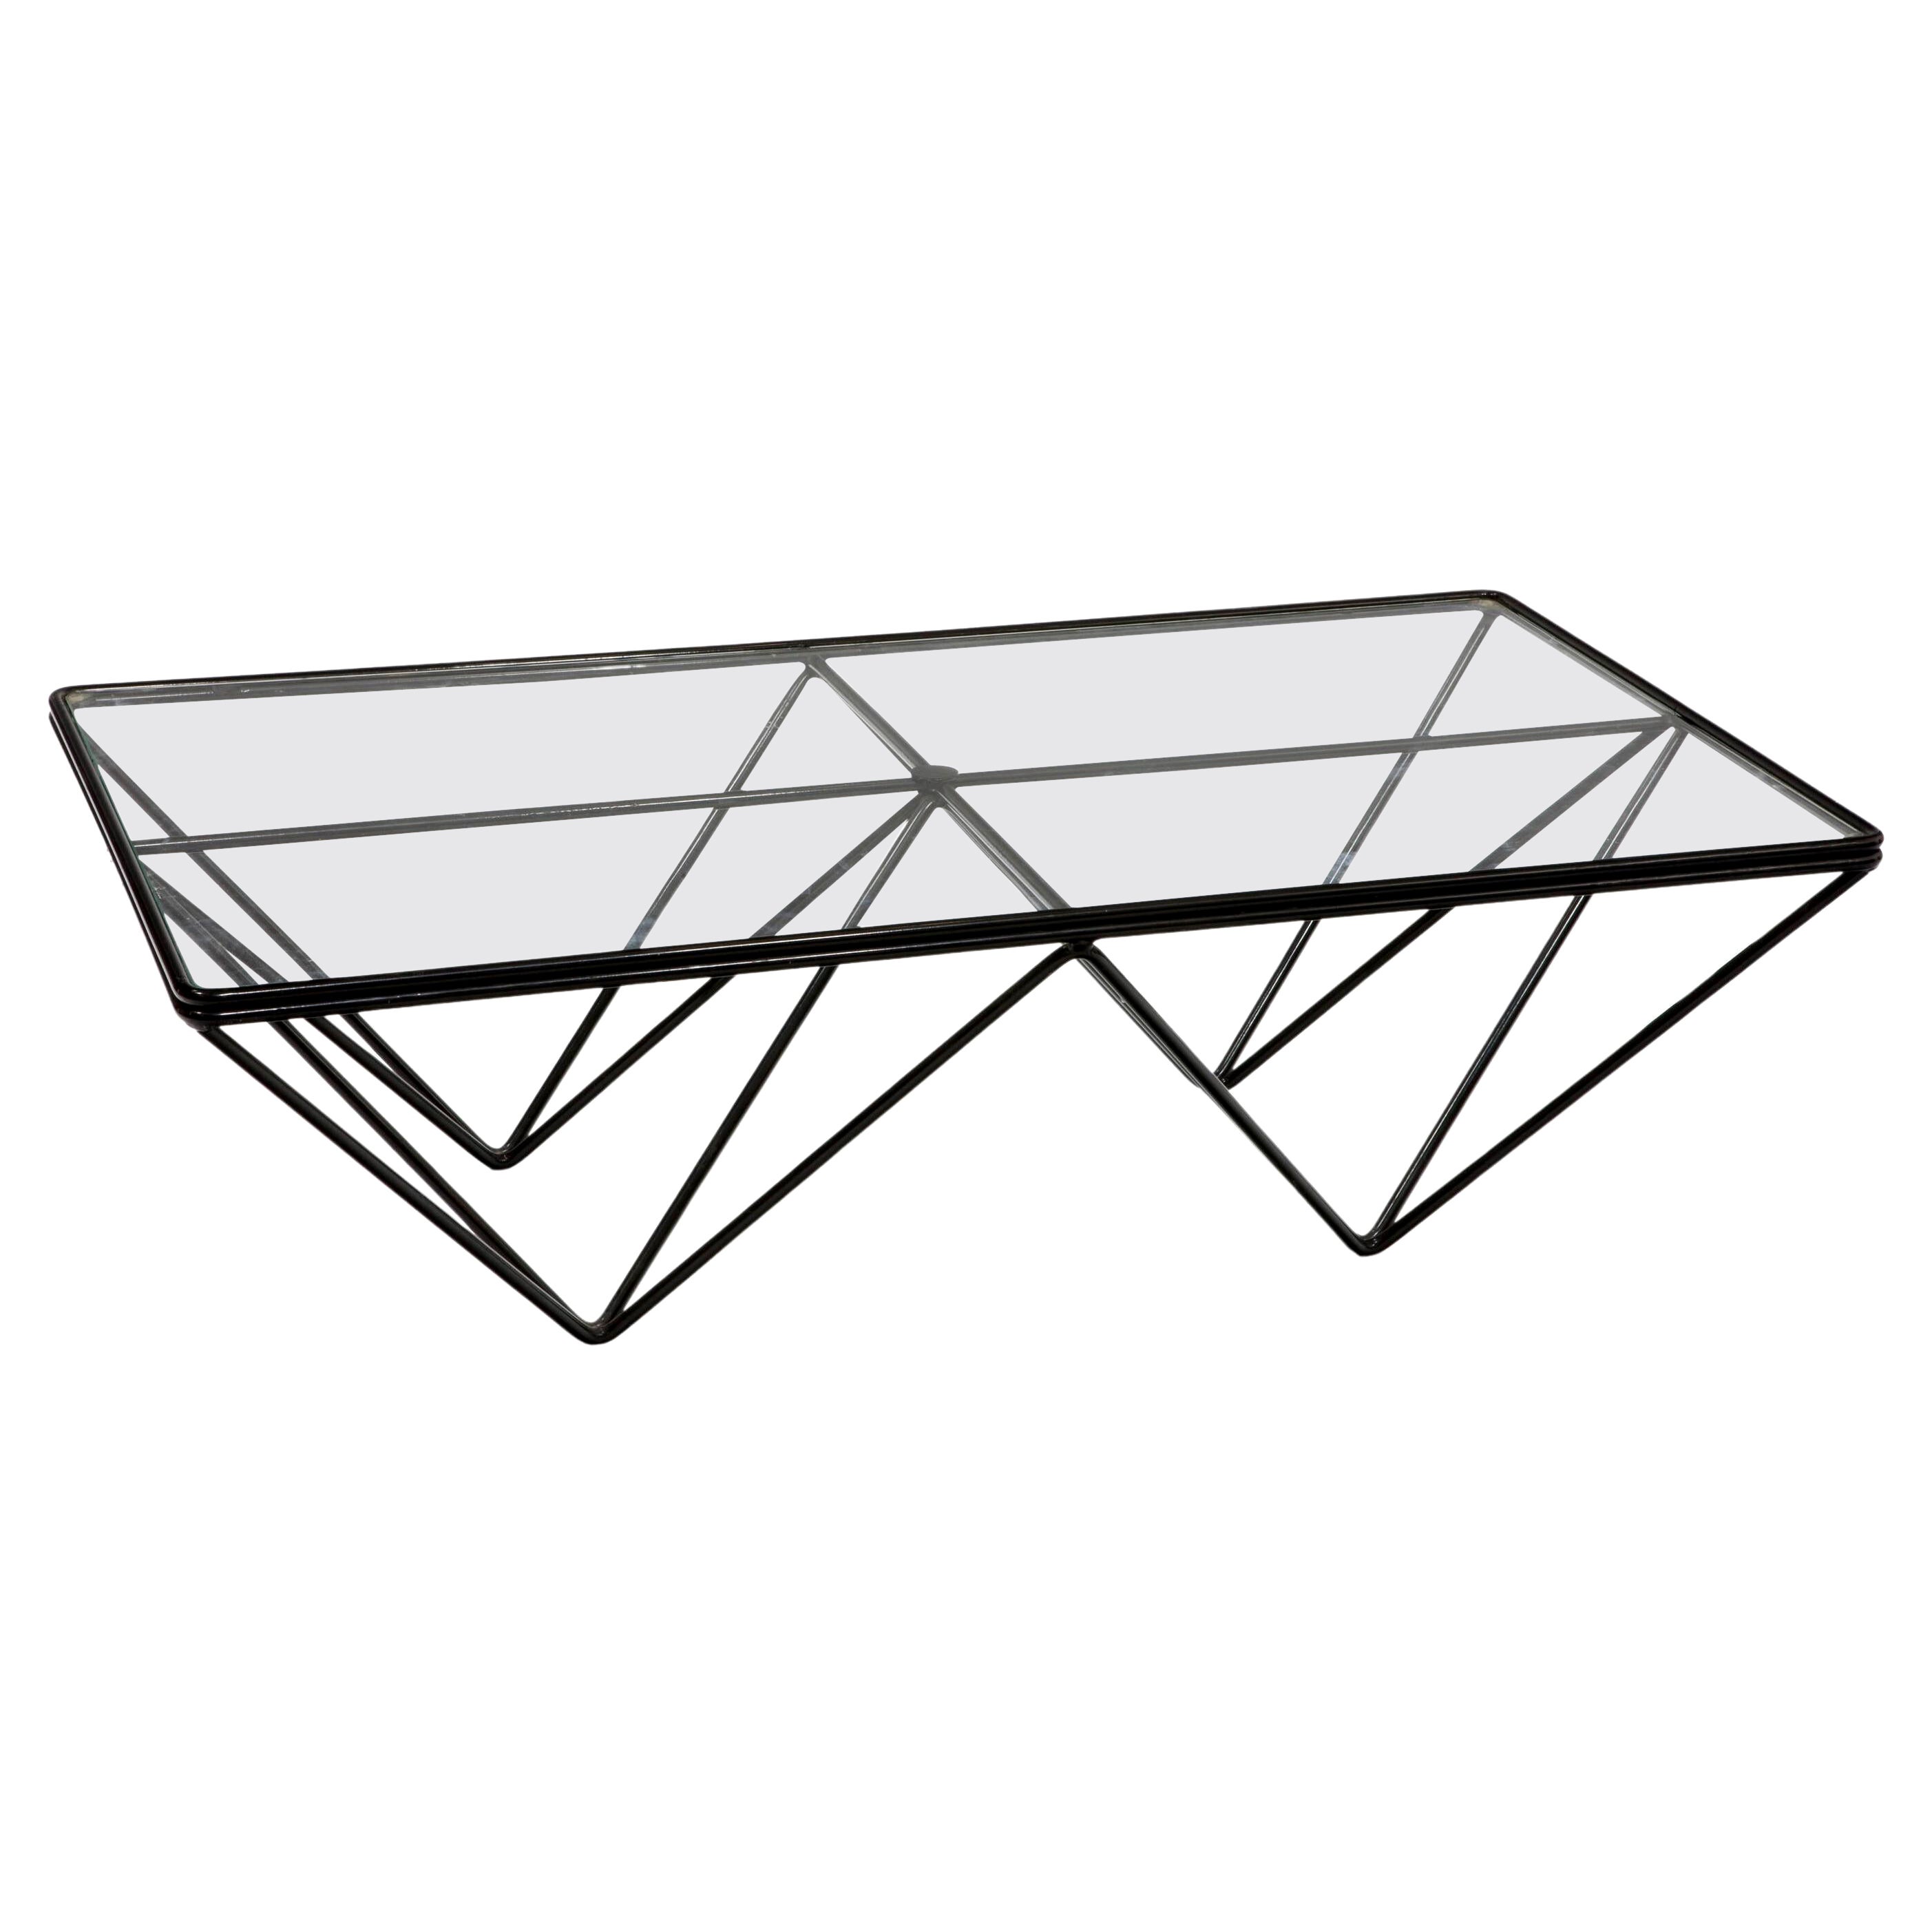 Steel and Glass Coffee Table "Alanda" by Paolo Piva for B&B Italia, 1980s